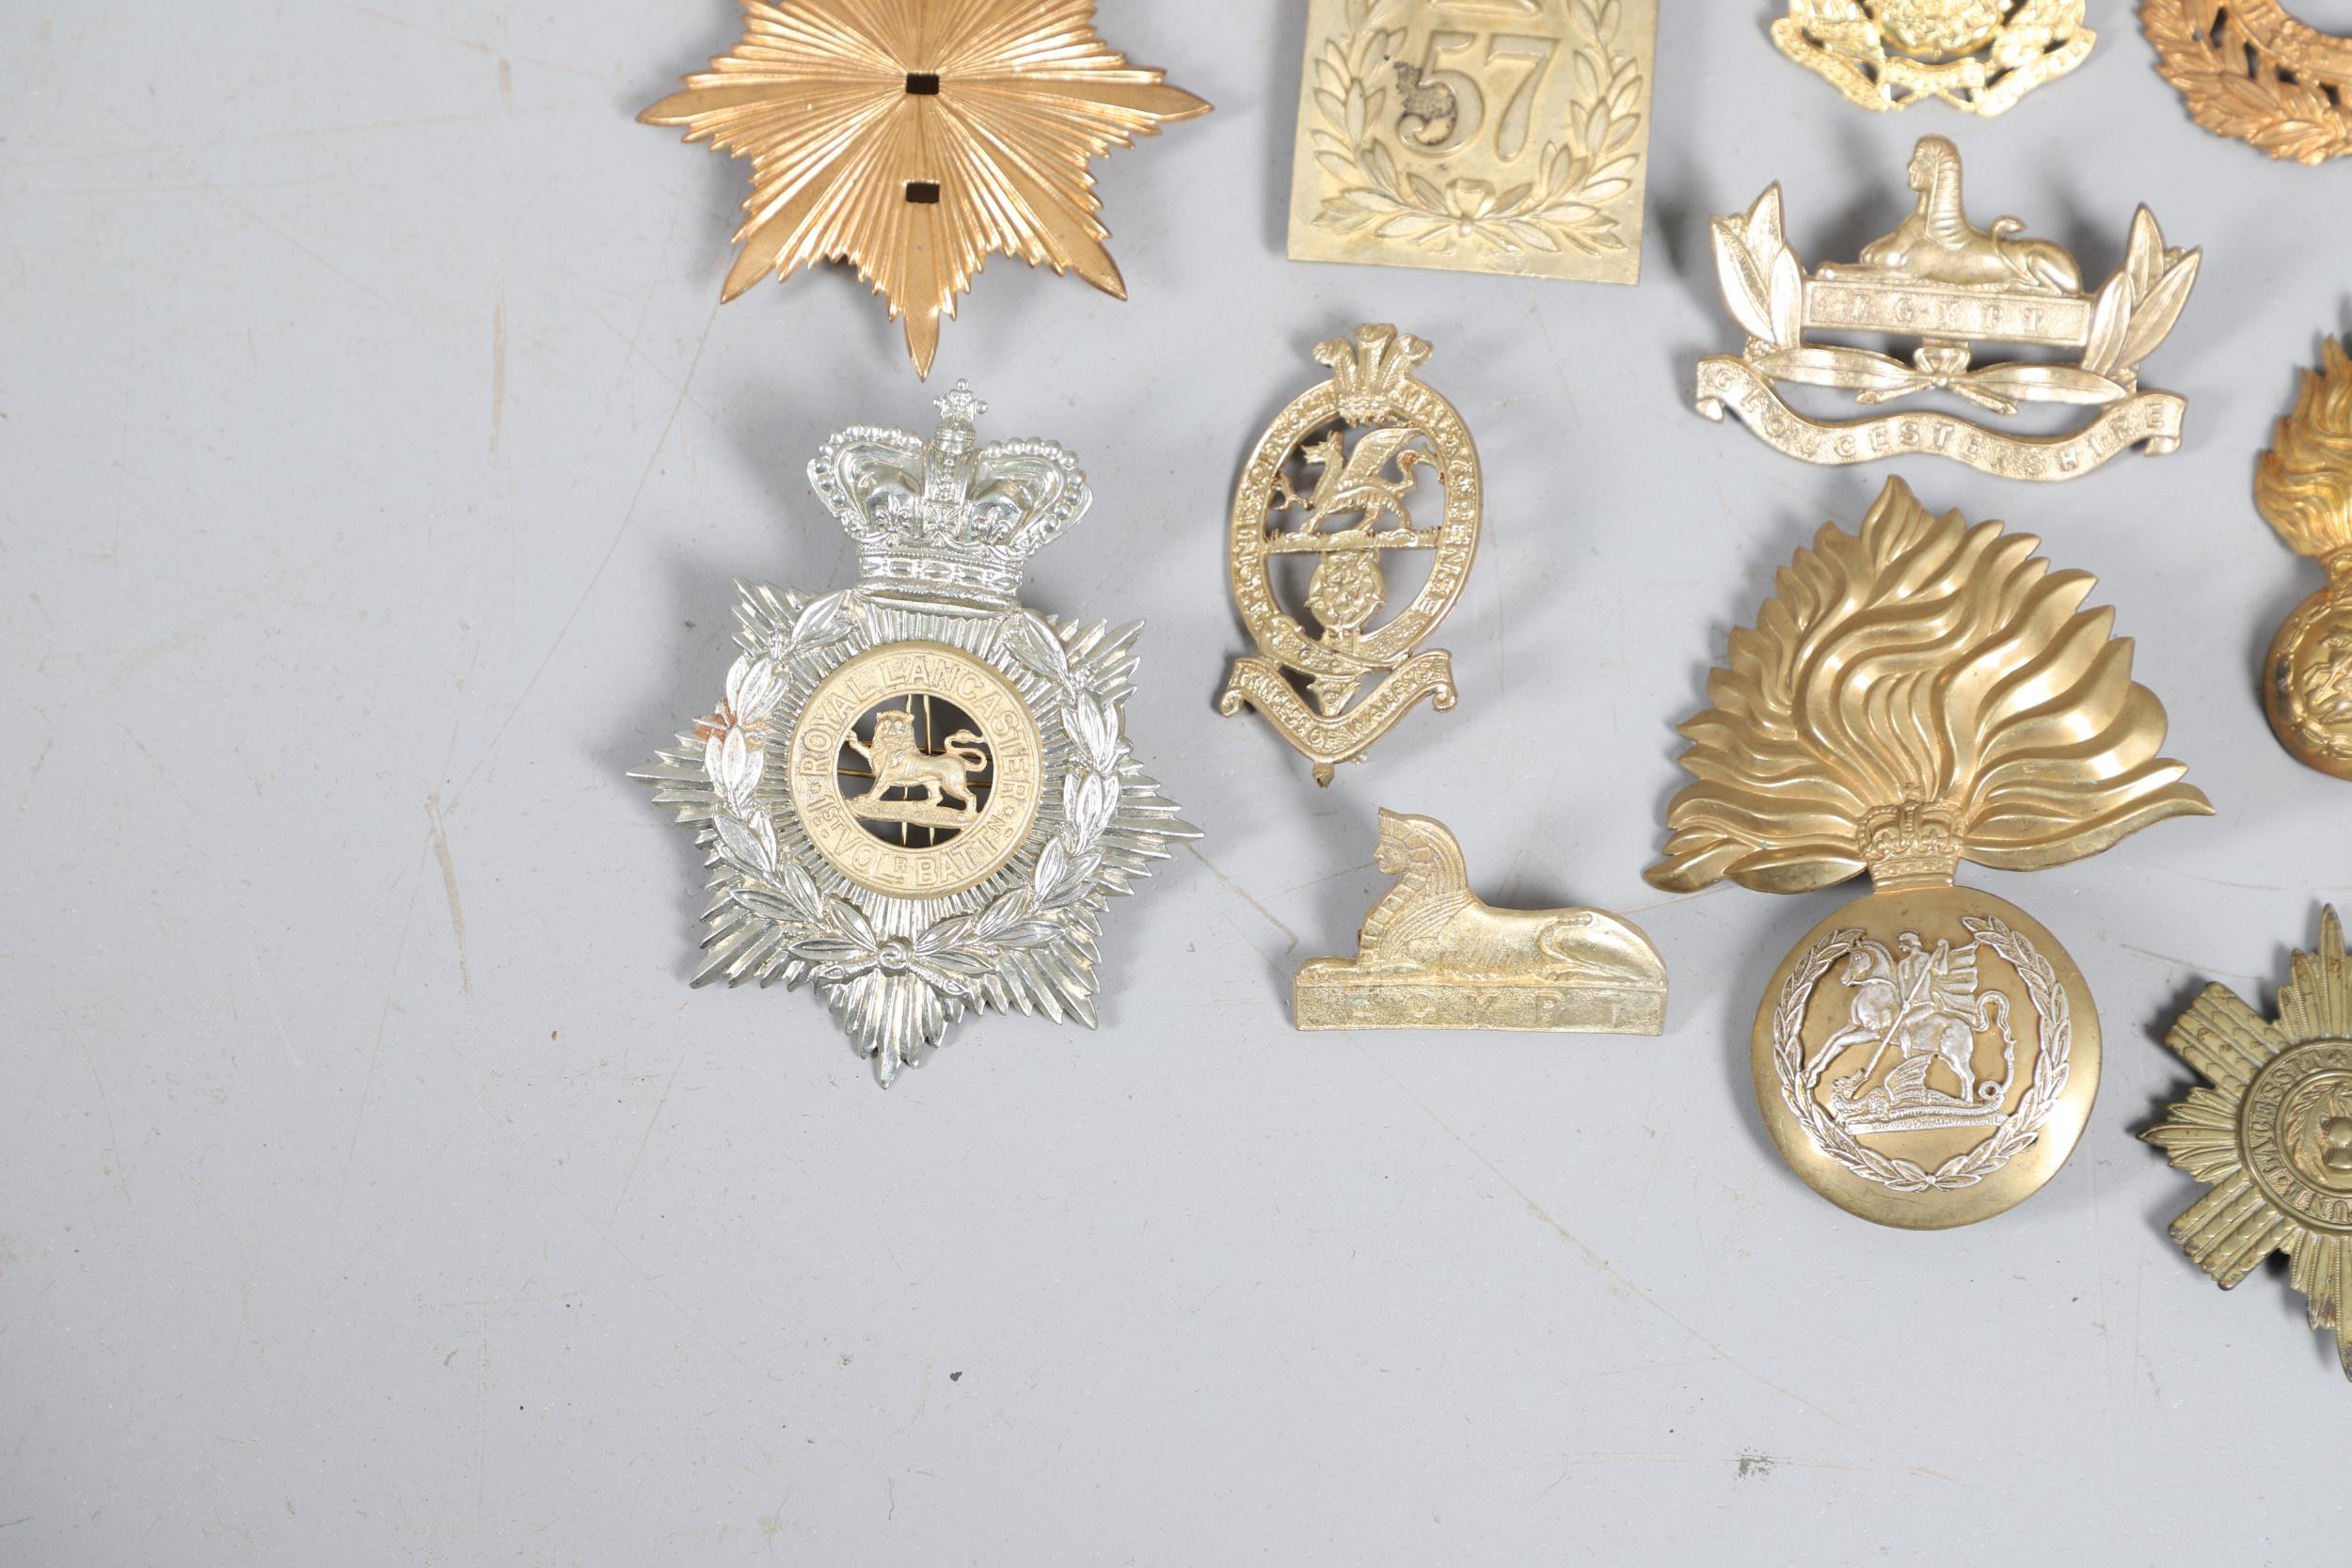 A COLLECTION OF VICTORIAN STYLE HELMET PLATES AND OTHER BADGES. - Image 6 of 10